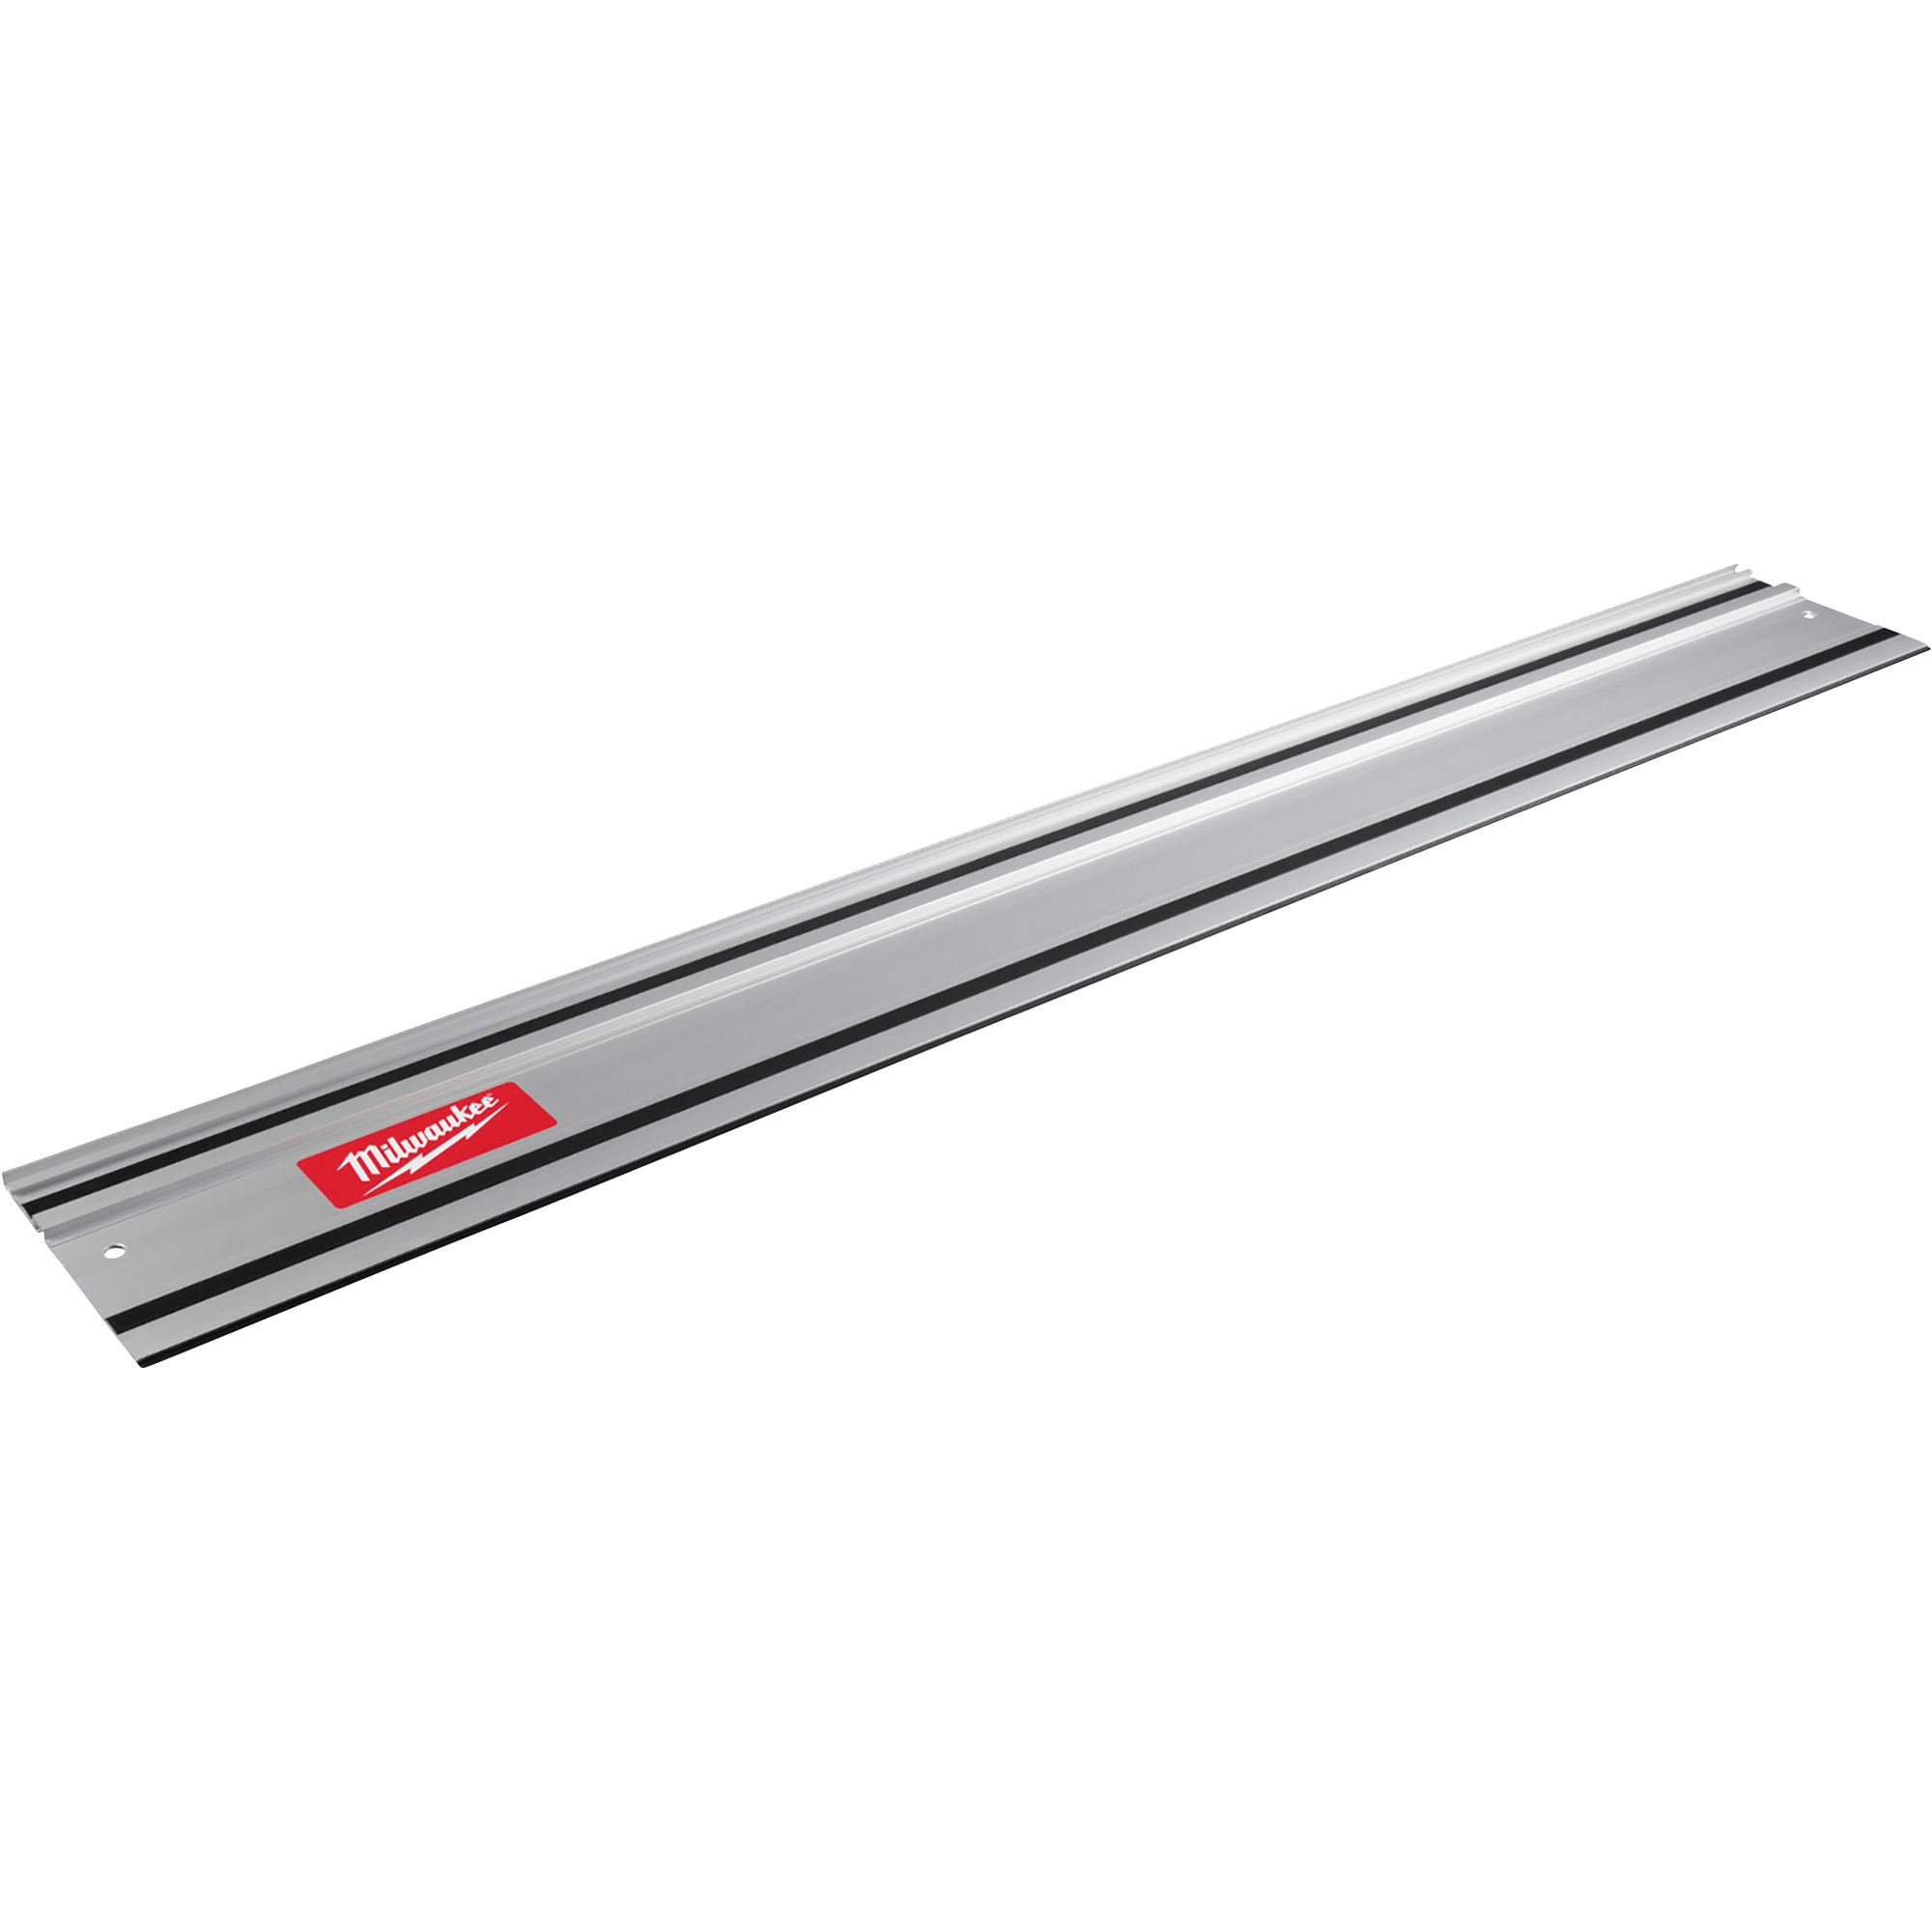 Guide Rail for M18 FUEL 6-1/2Inch Plunge Track Saw, 55Inch, Model - Milwaukee 48-08-0571